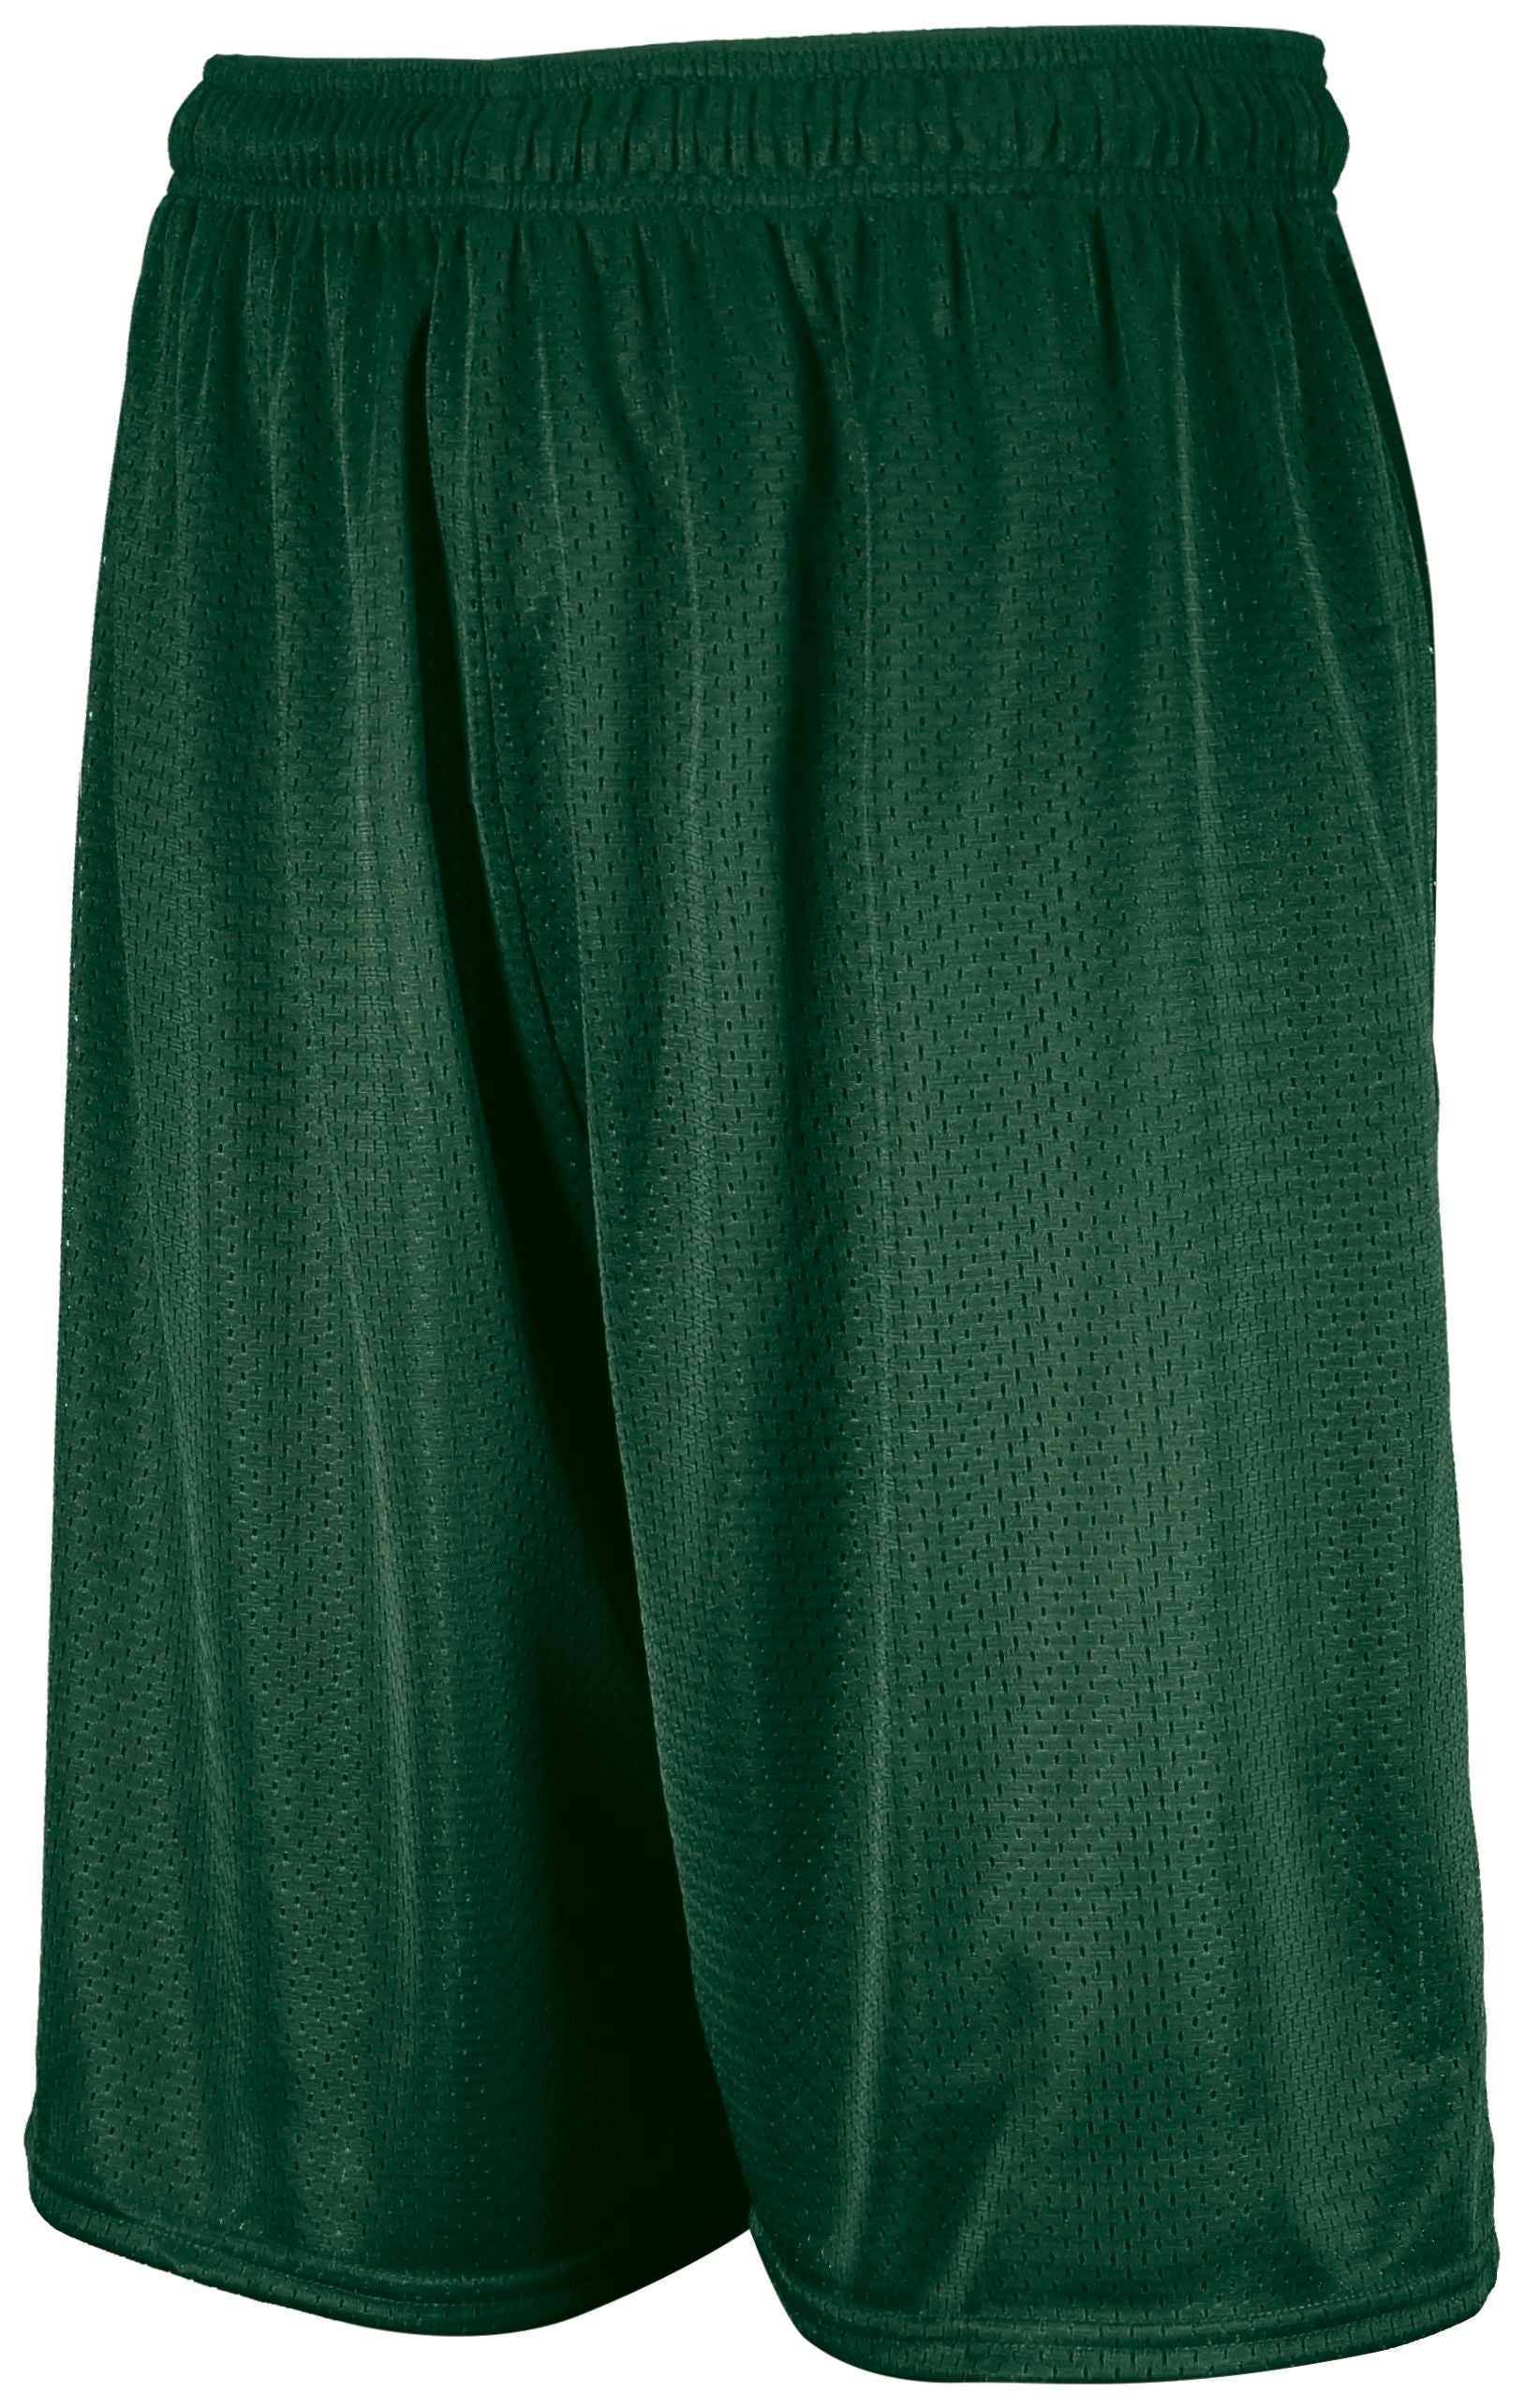 Russell Athletic Dri-Power Mesh Shorts in Dark Green  -Part of the Adult, Adult-Shorts, Russell-Athletic-Products product lines at KanaleyCreations.com